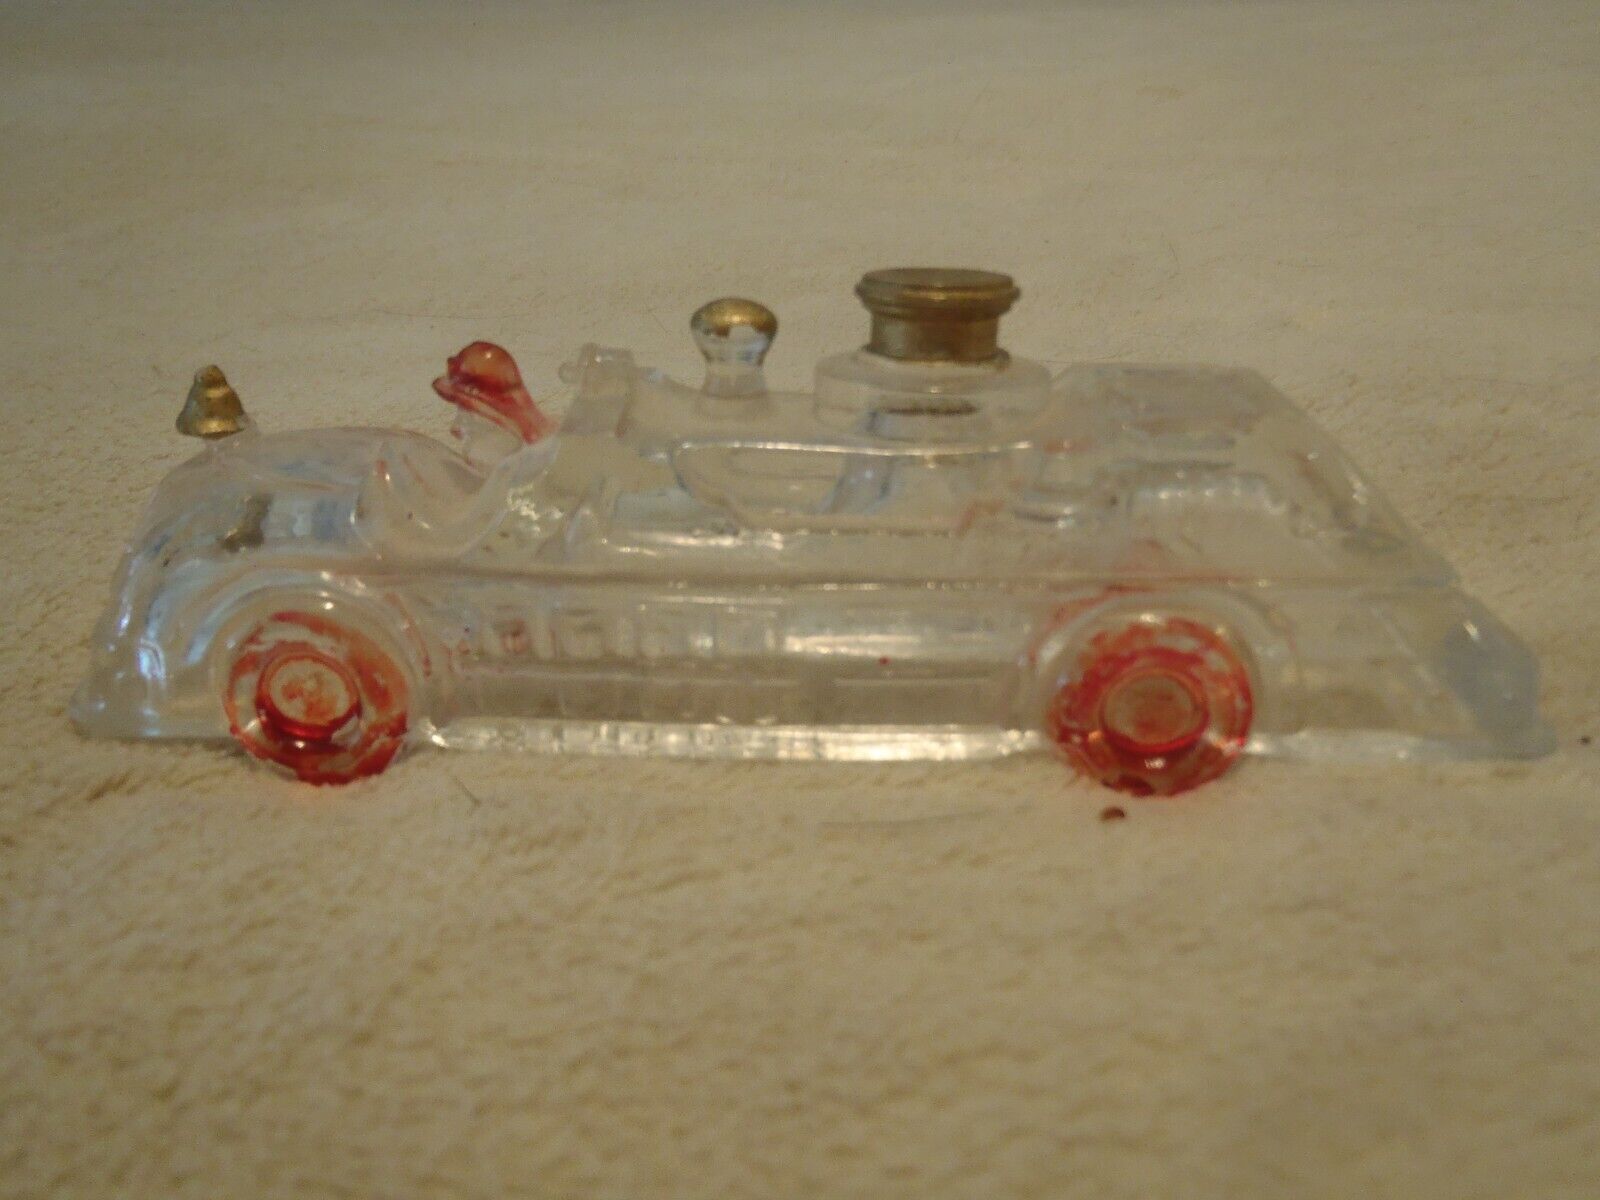 ANTIQUE GLASS CANDY CONTAINER - FIRE ENGINE W/FIREMAN - PAINTED